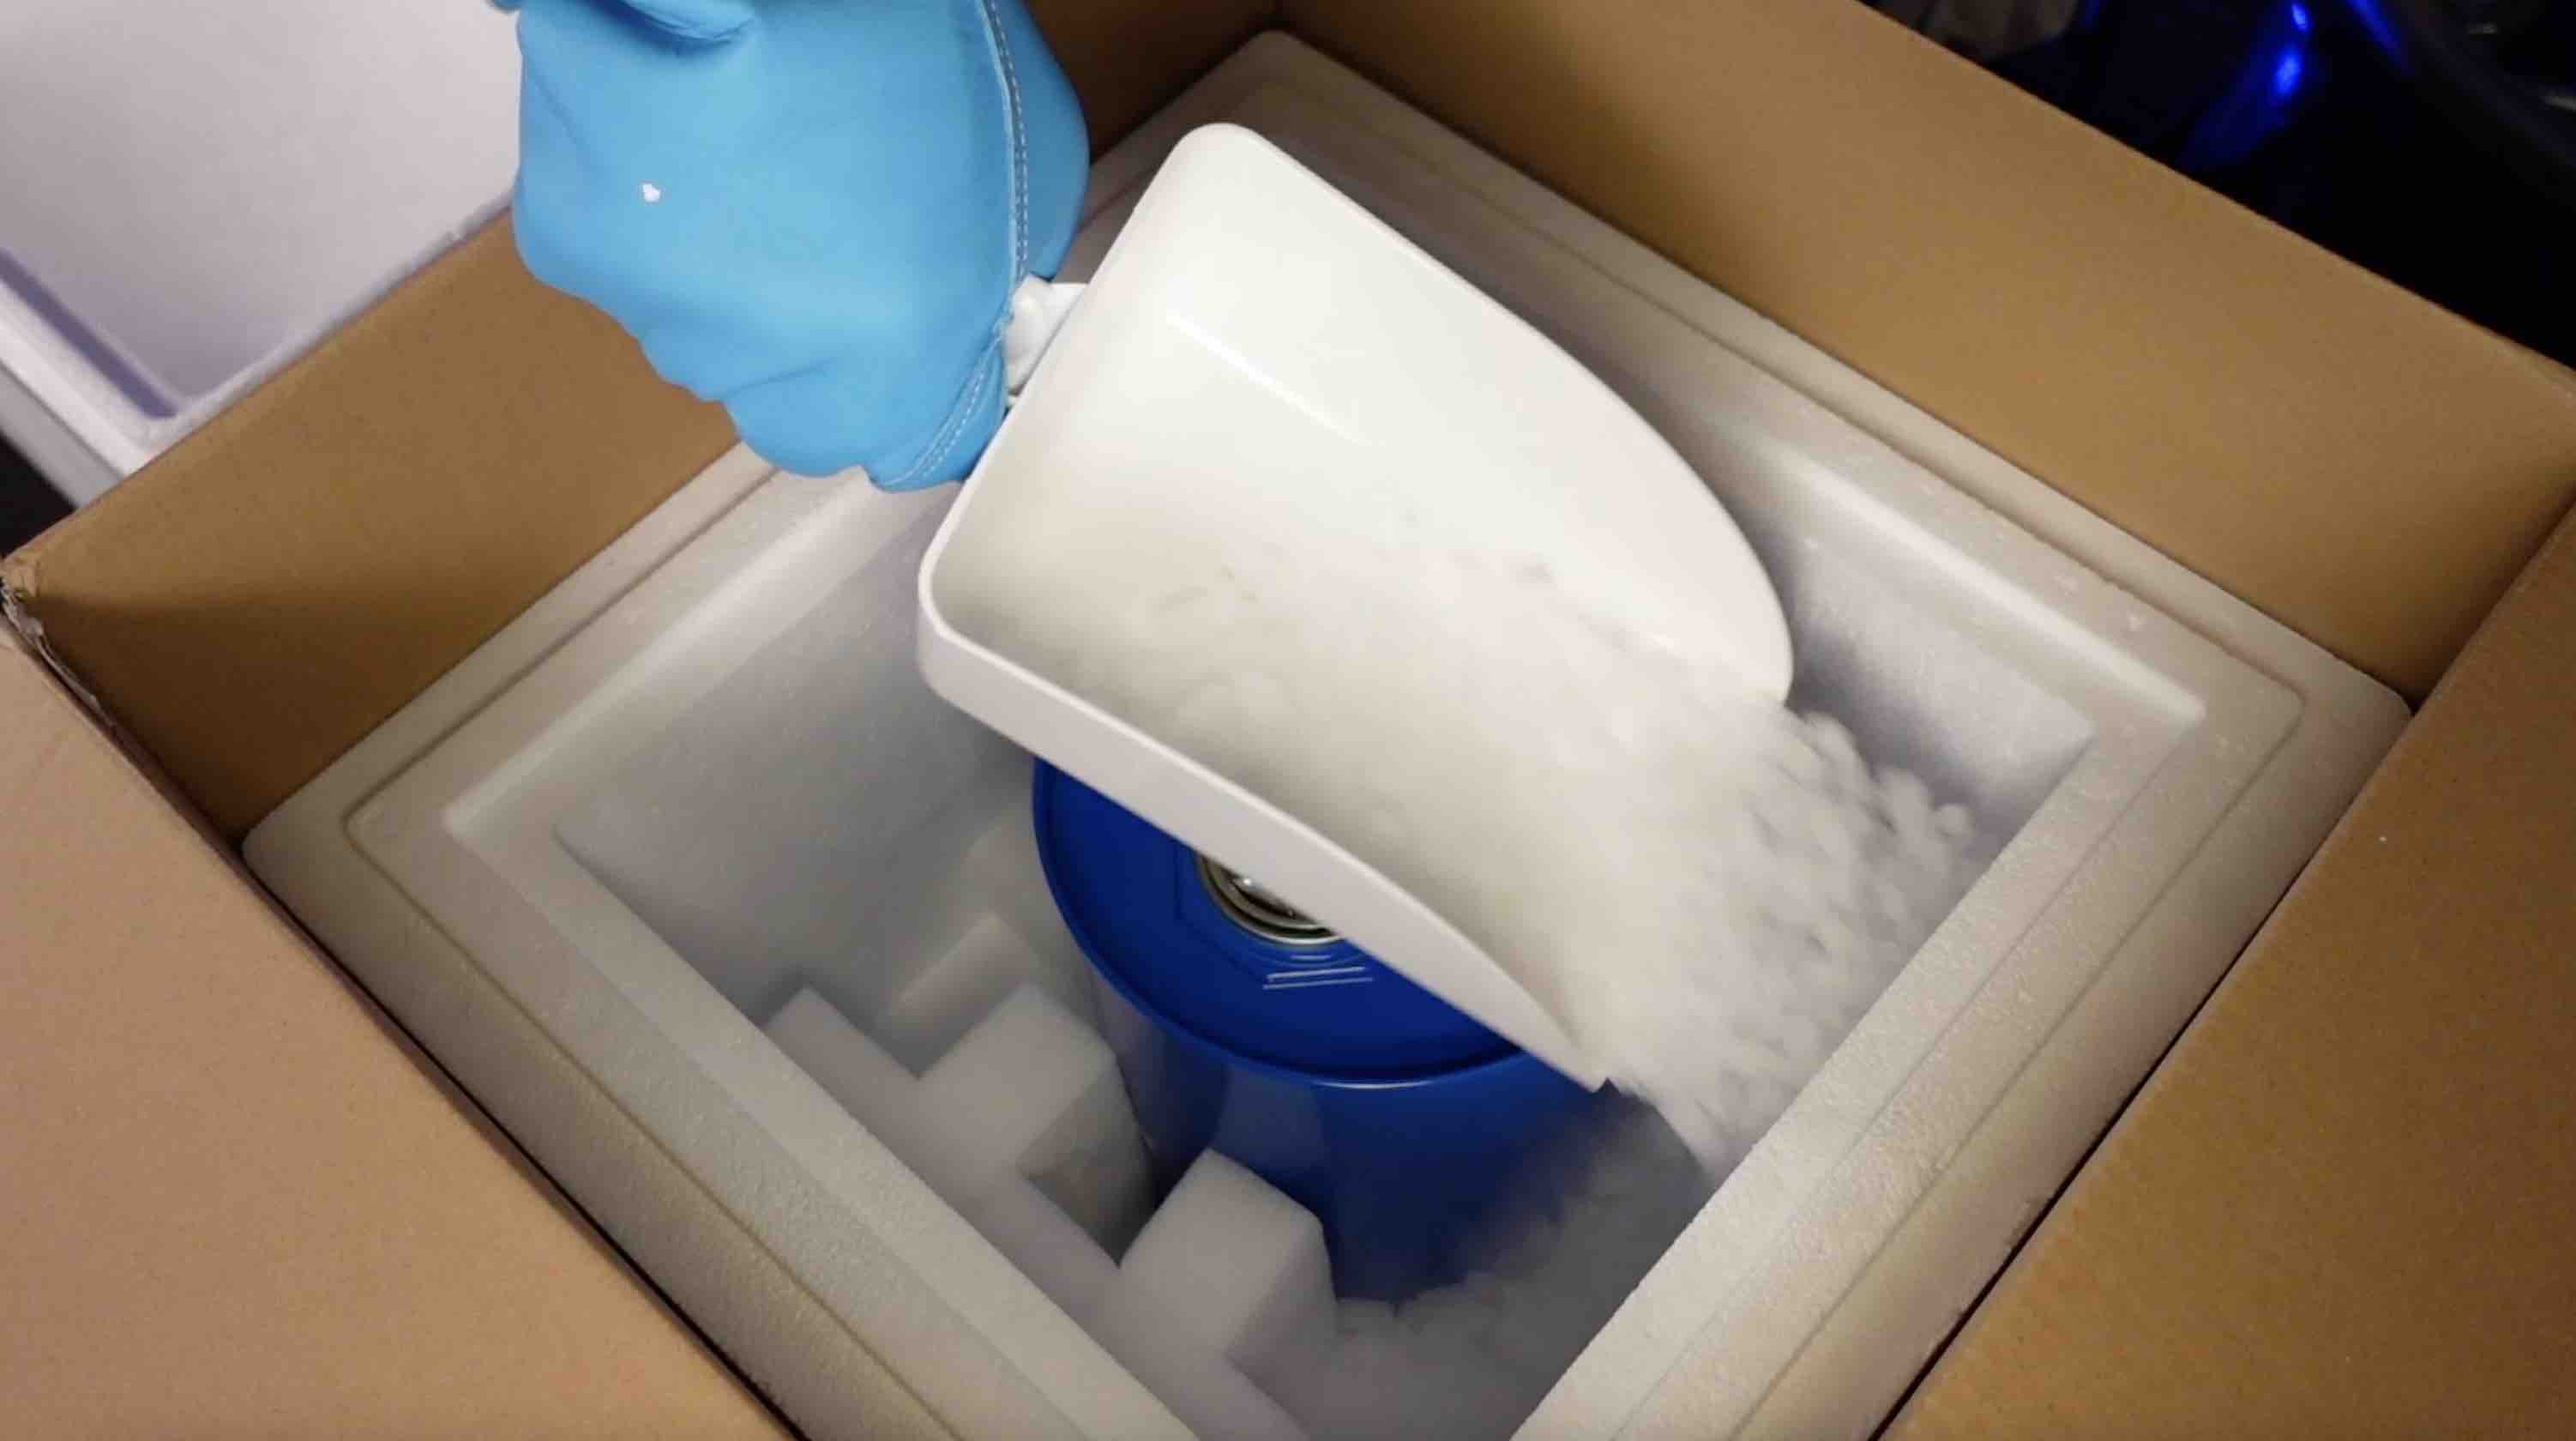 using dry ice in an overpack with dangerous goods